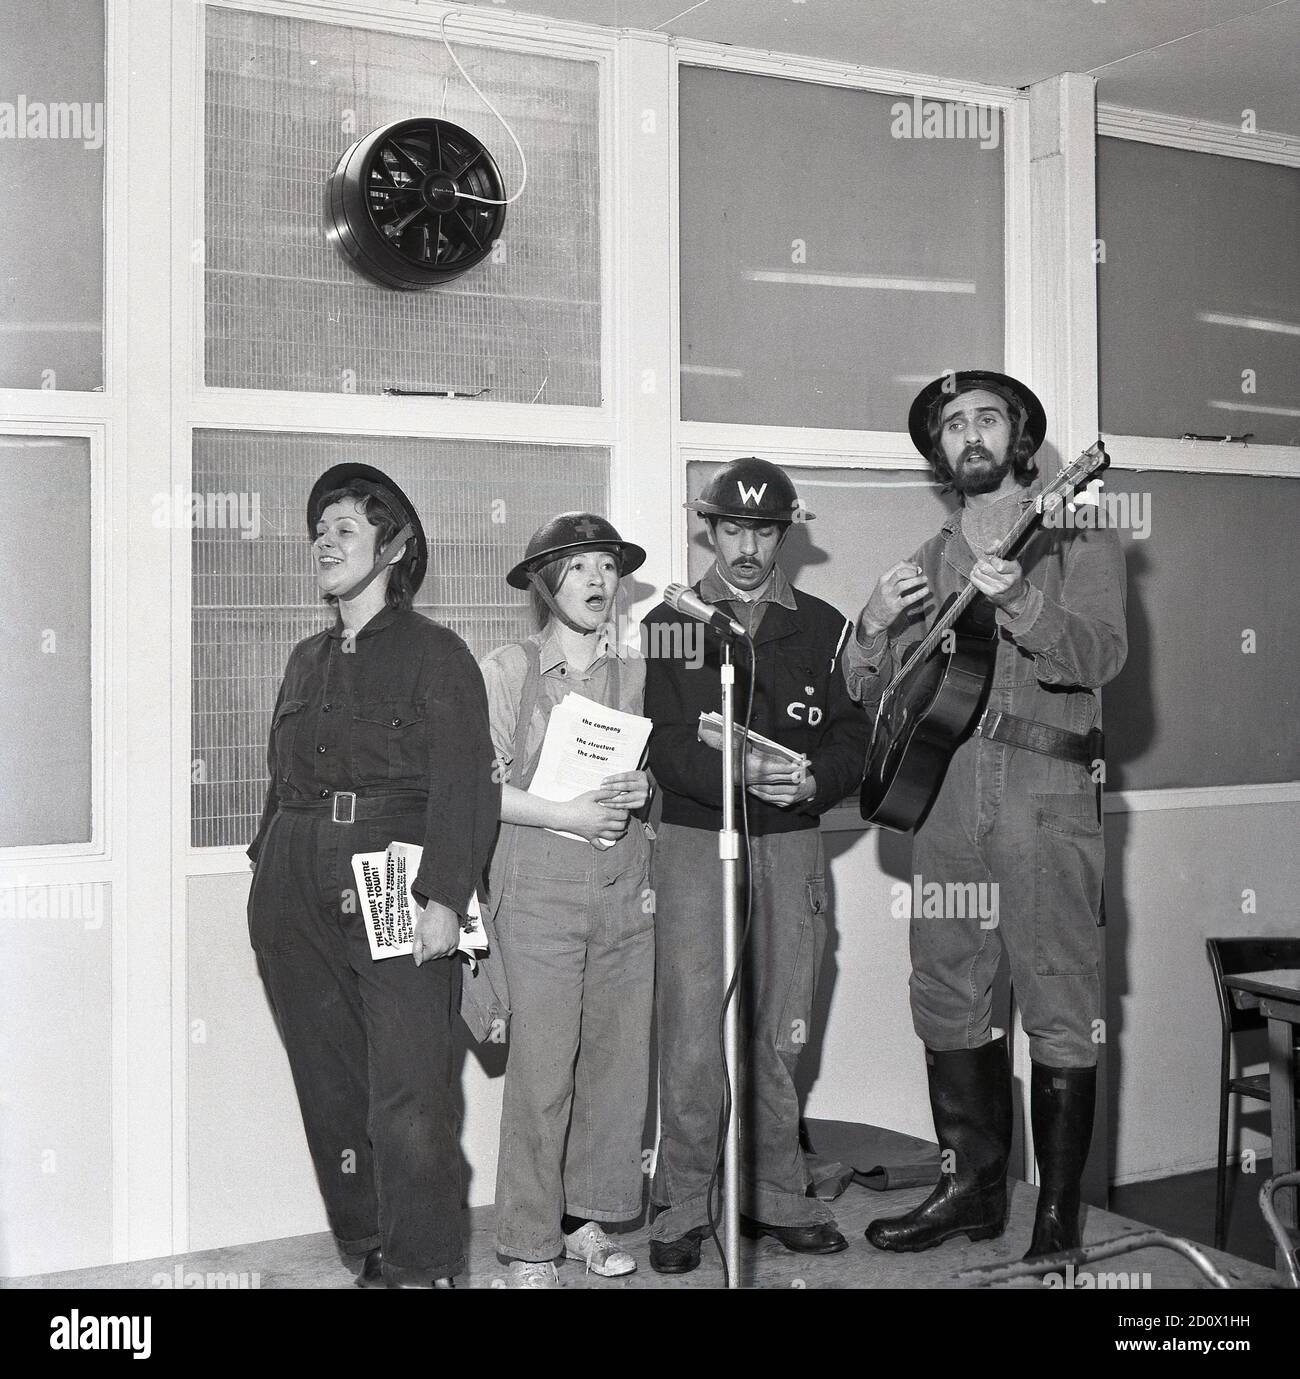 1972, historical picture of four adult performers from the London Bubble theatre company dressed in WW2 costumes presenting an entertainment, 'The Blitz Show' inside a room at a childrens party, London, England, UK. Devised by Frank Hatherley, the show was based on those who entertained Londoners down in the underground shelters during the height of the Blitz in May 1941. These entertainers were not professional performers but members of the local community giving amusement and uplift to those suffering hardship at this most awful of times. Stock Photo